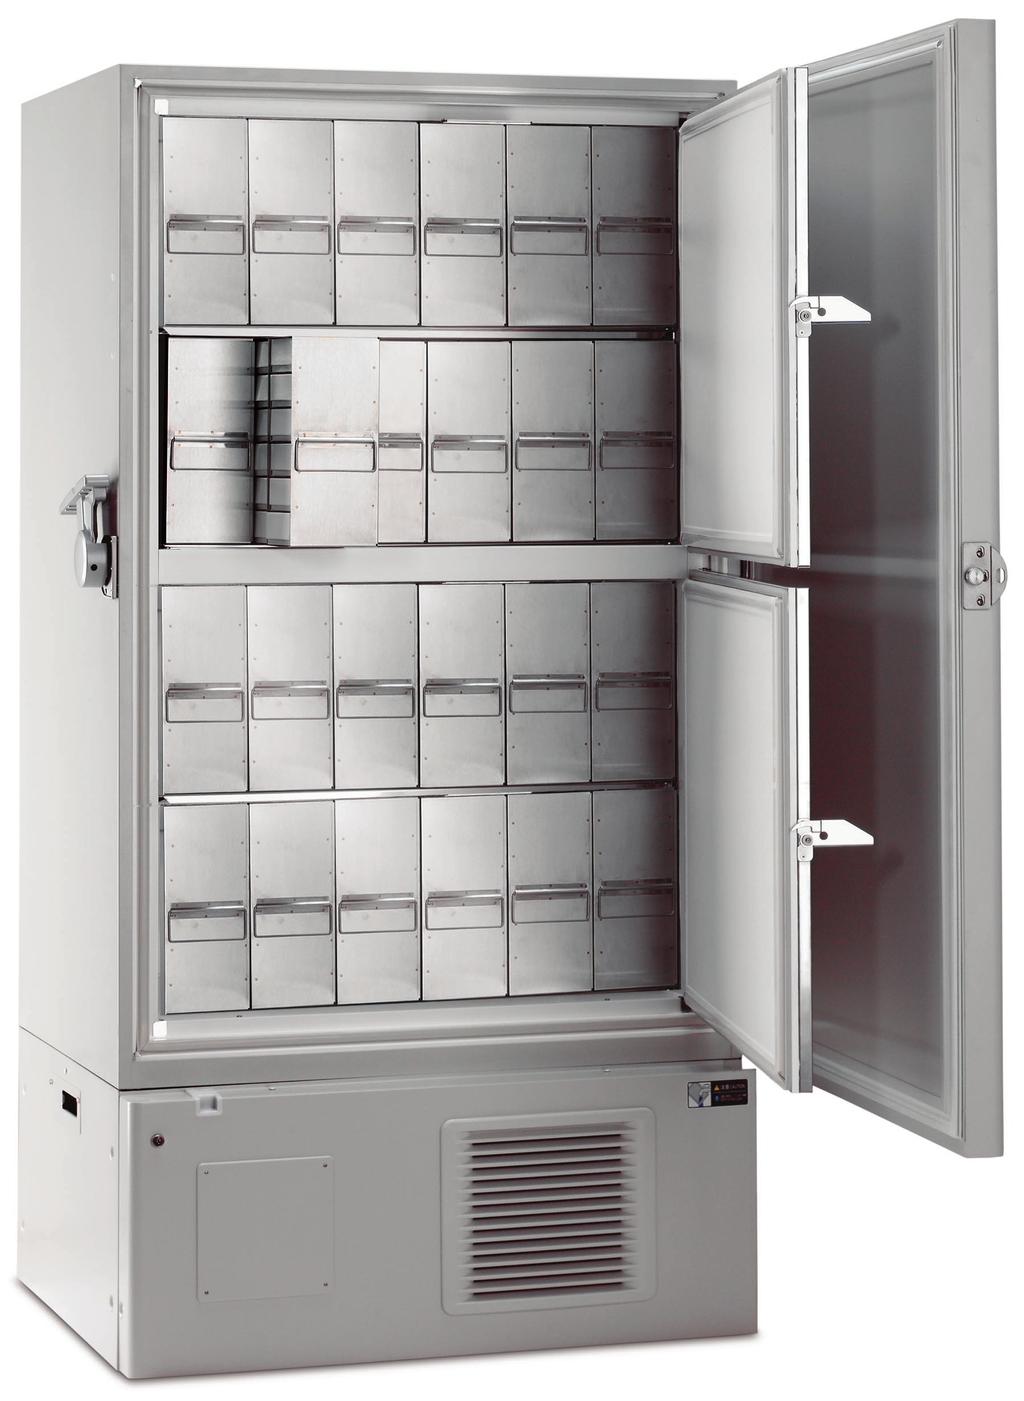 Integrated Solutions to Ultra-Low Temperature Freezers 1. SANYO patented V.I.P. Vacuum Insulation Panel cabinet construction offers superior insulation with maximum use of interior space. 2.